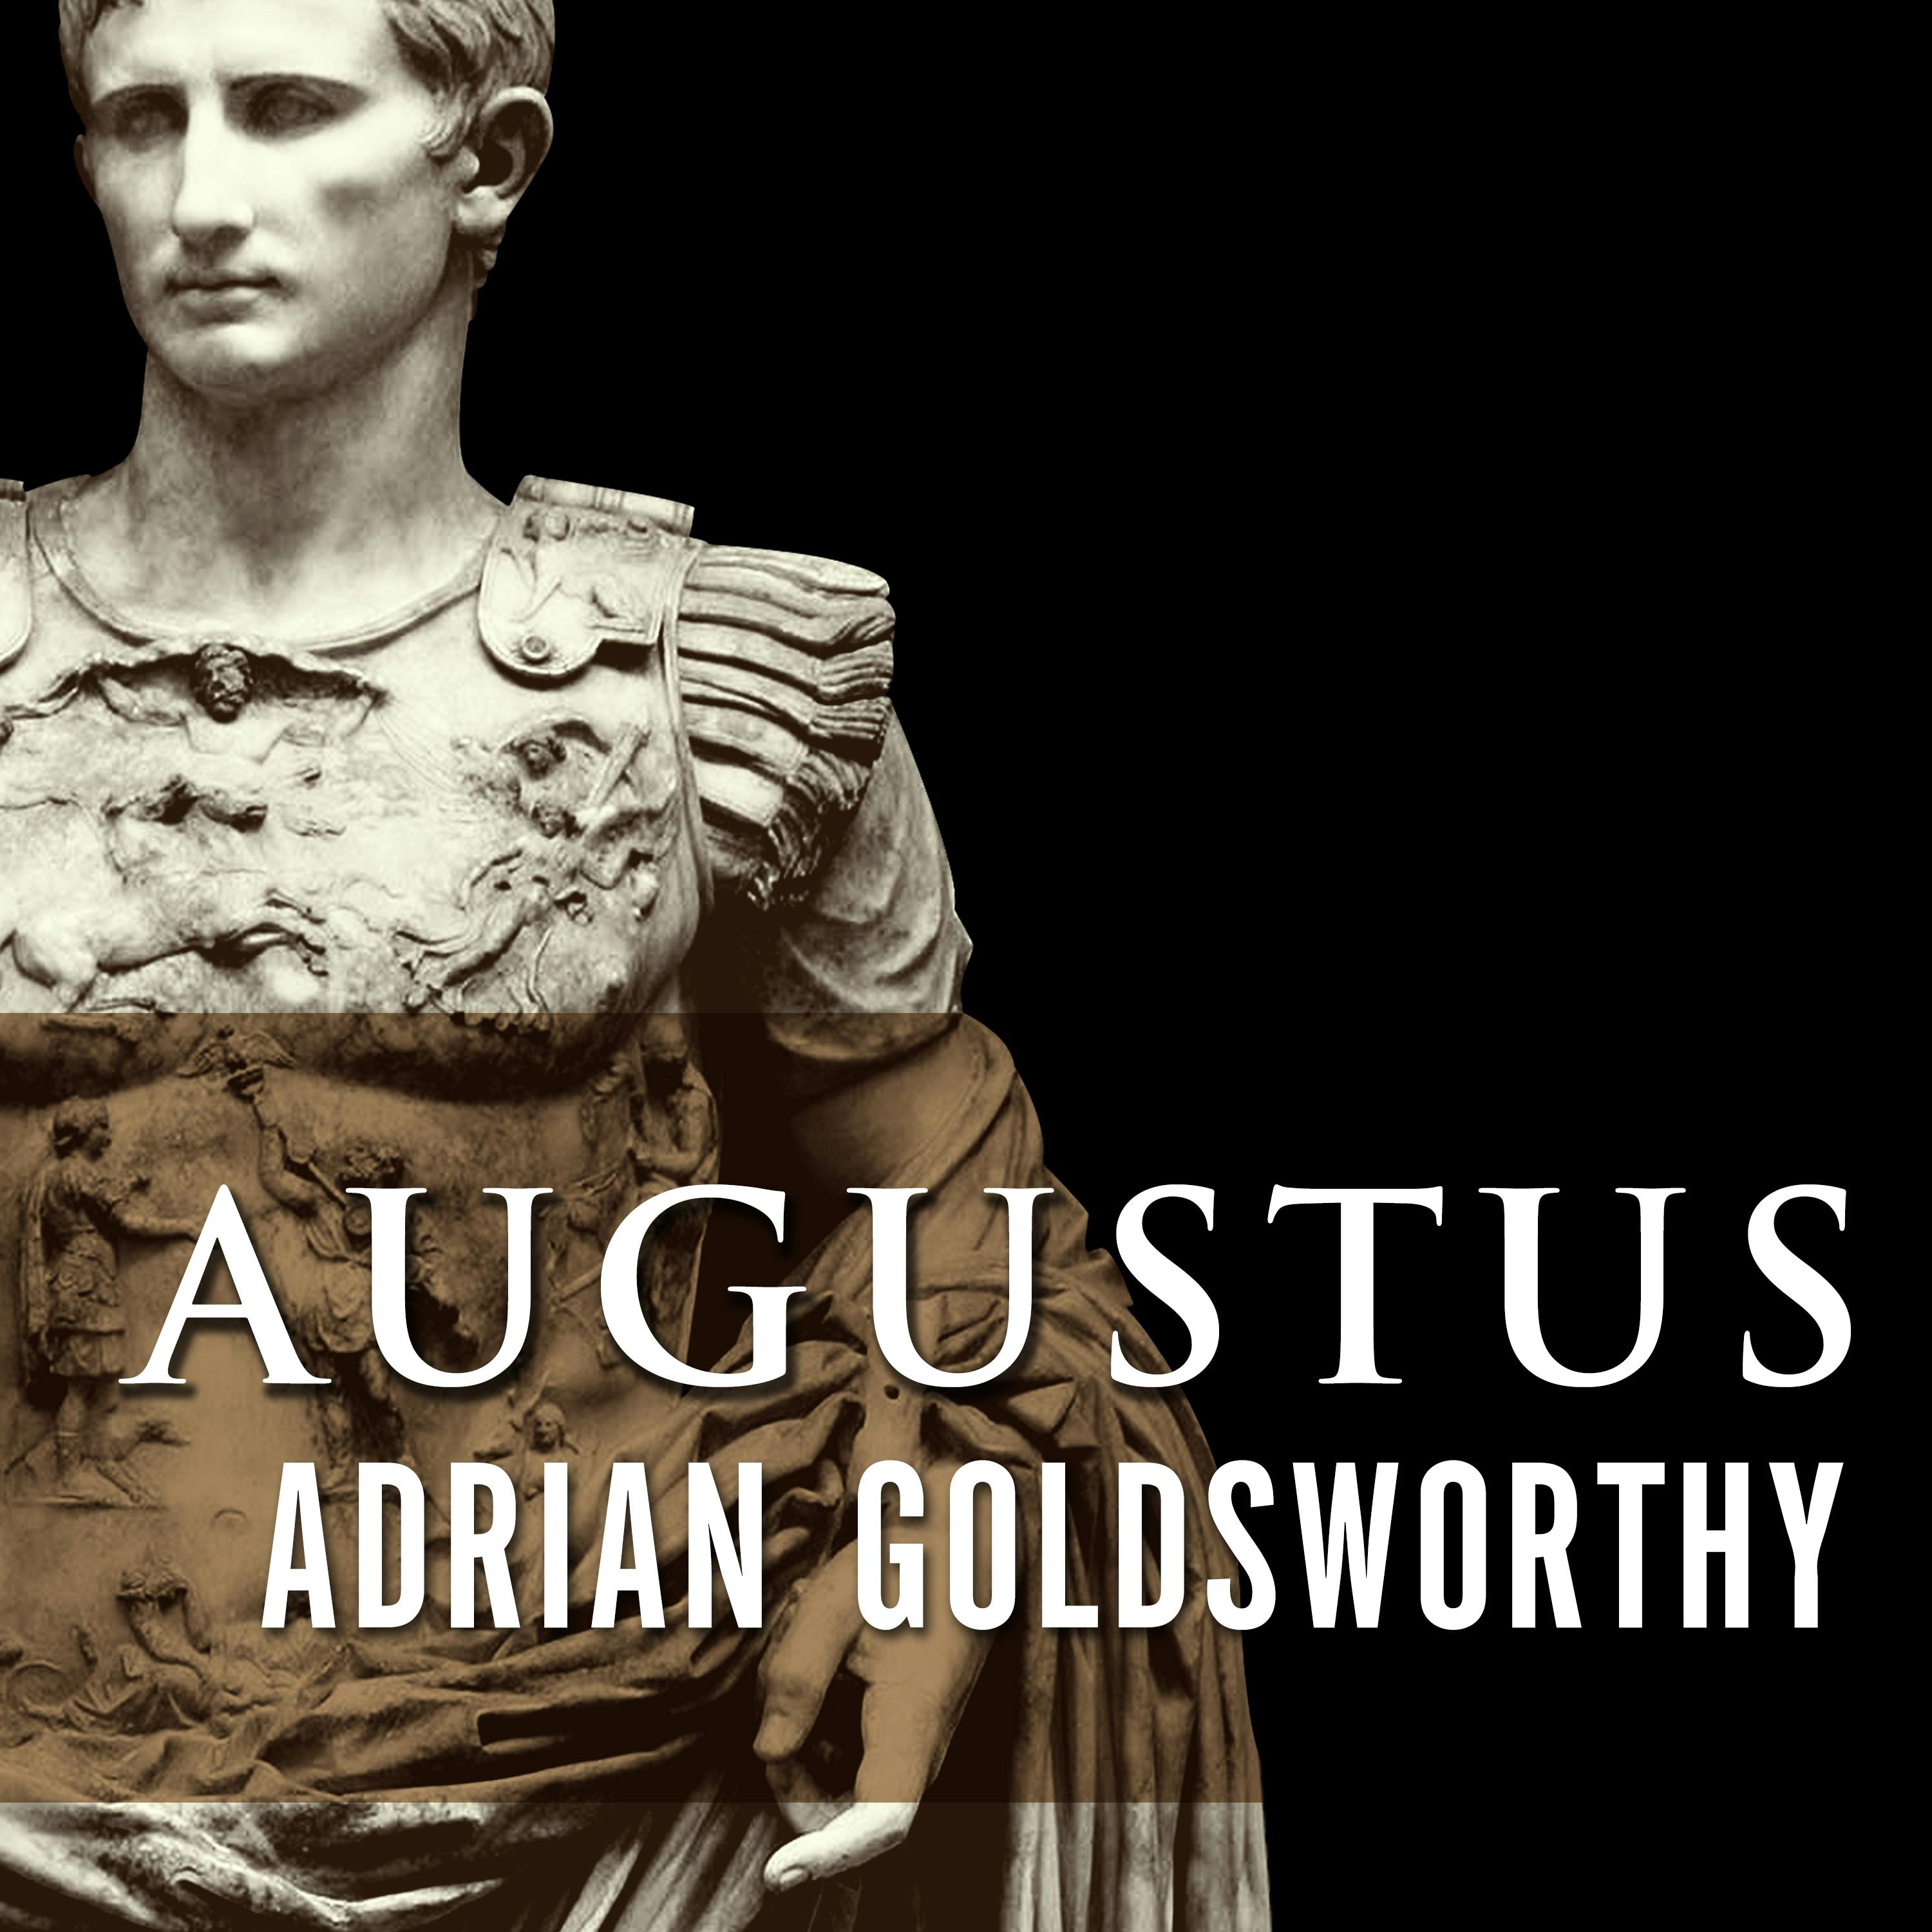 Augustus: First Emperor of Rome - Adrian Goldsworthy